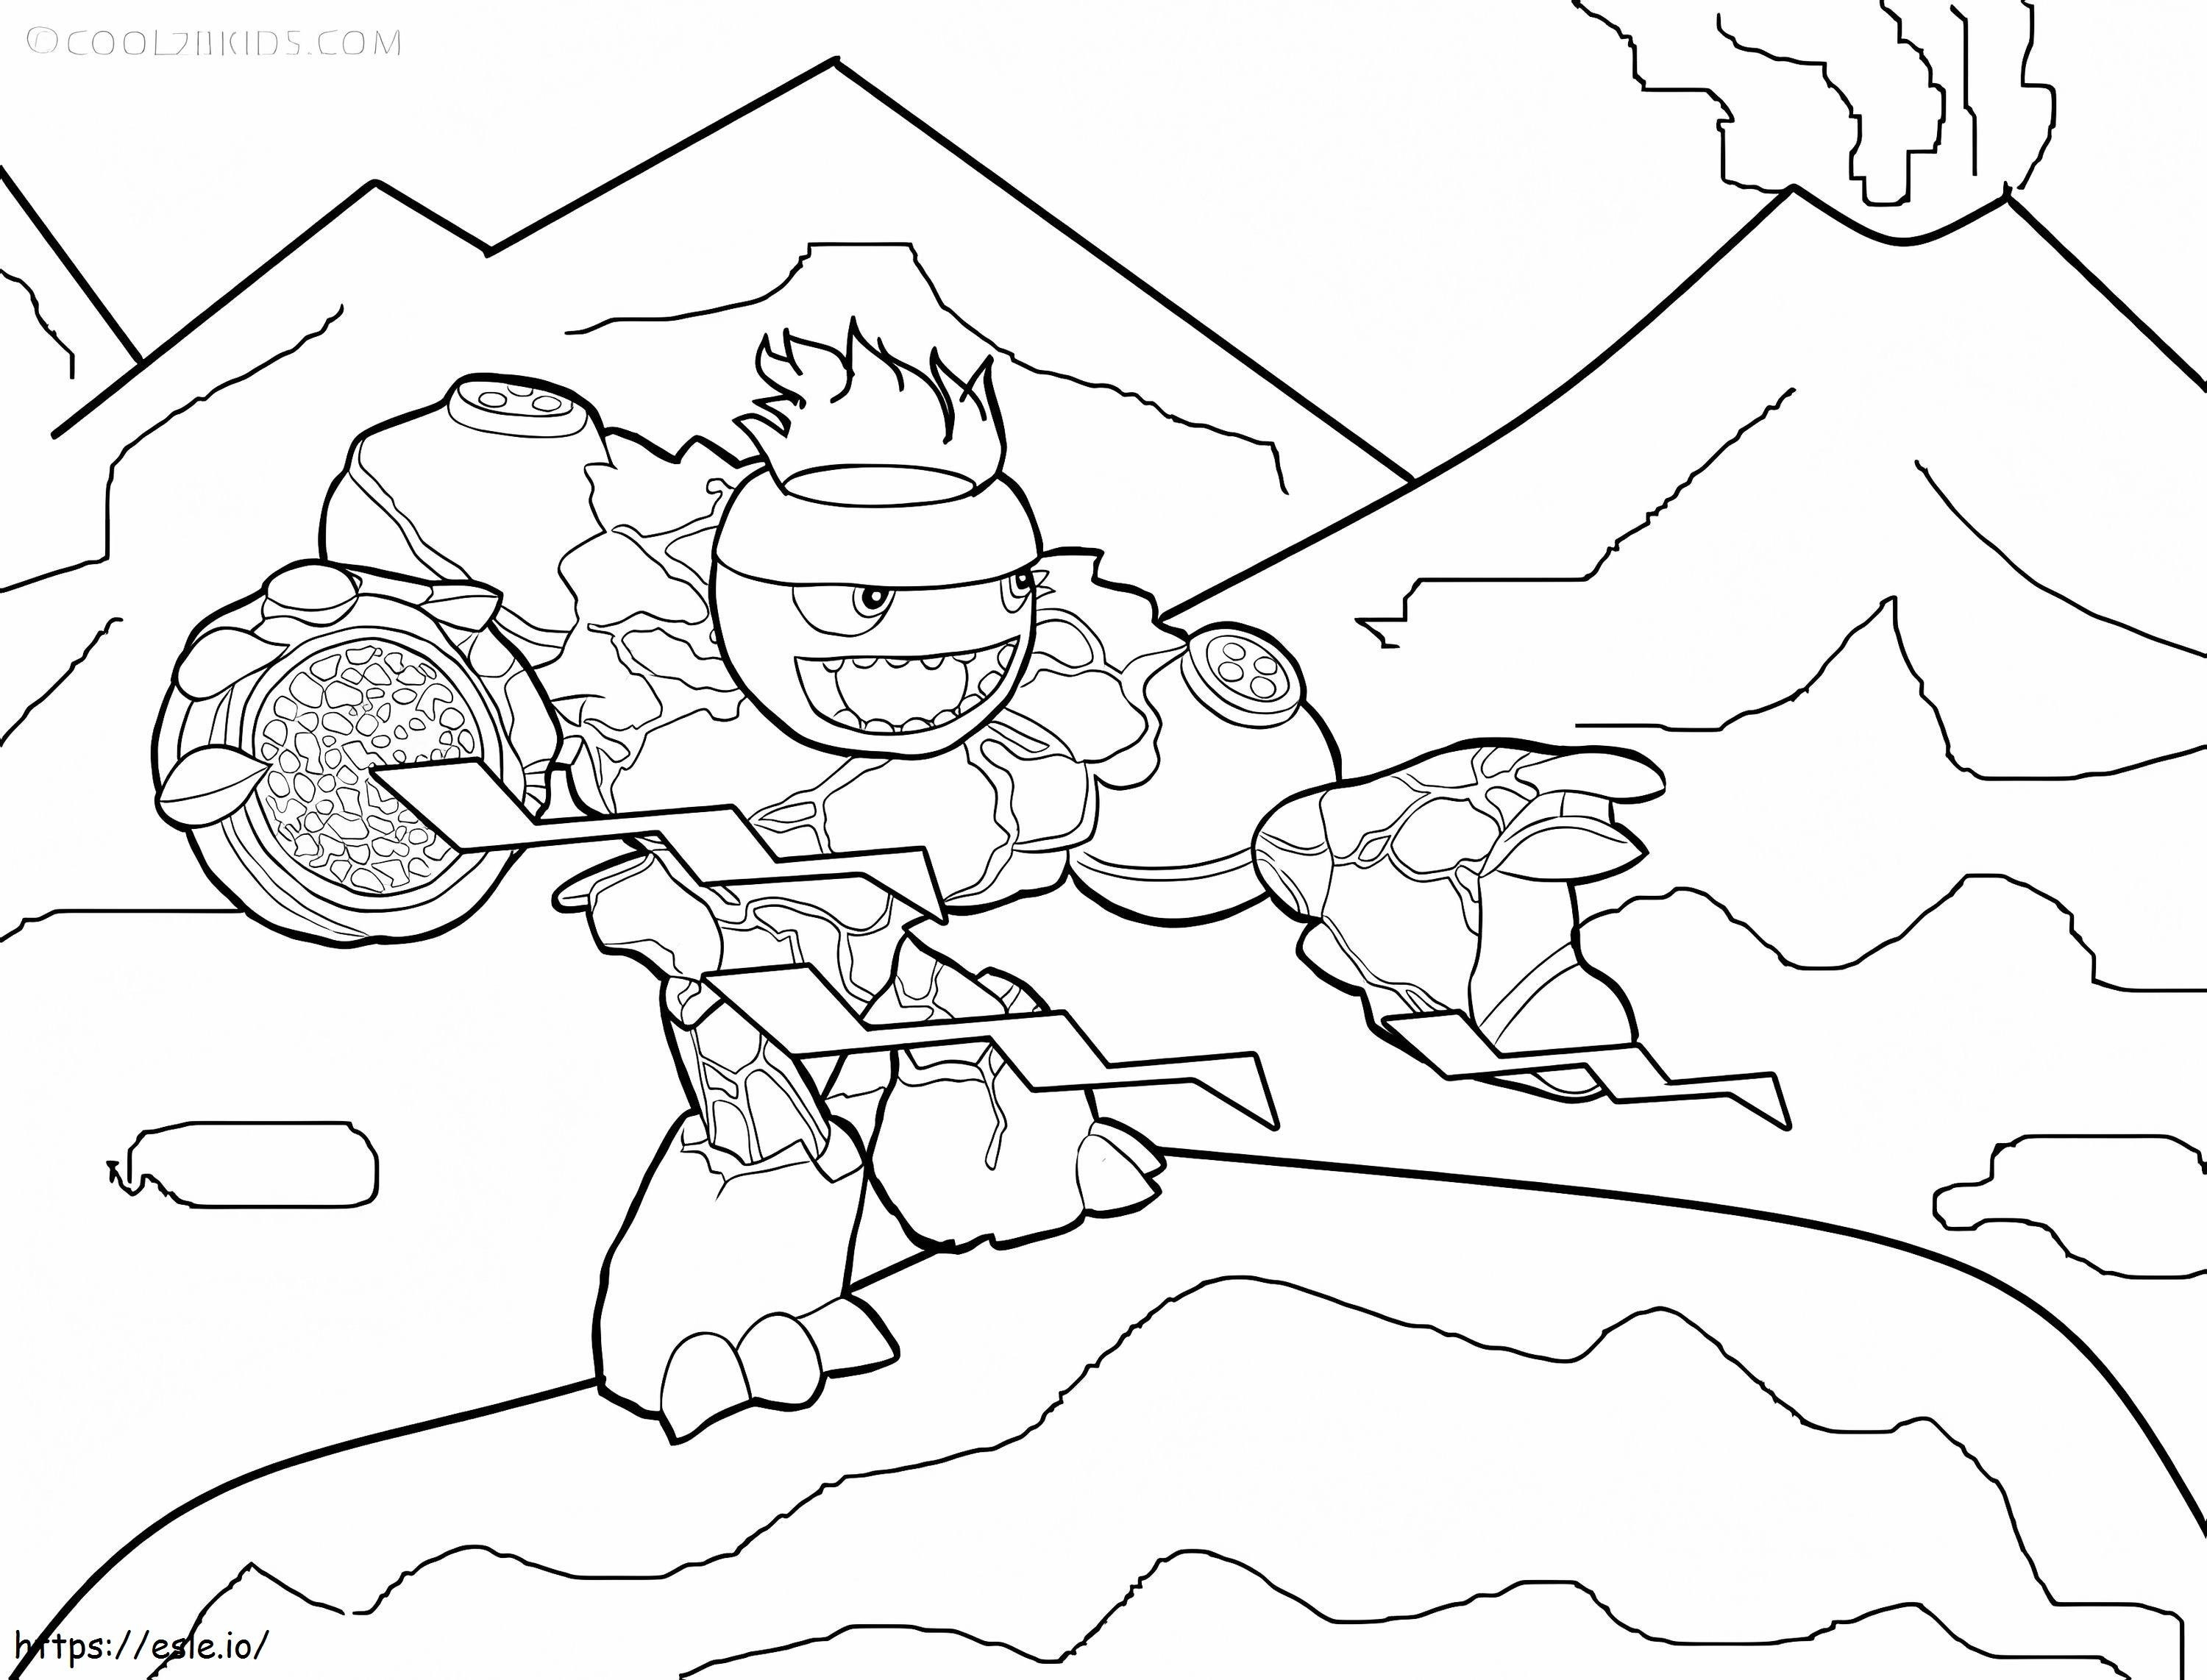 Cartoon Giant coloring page